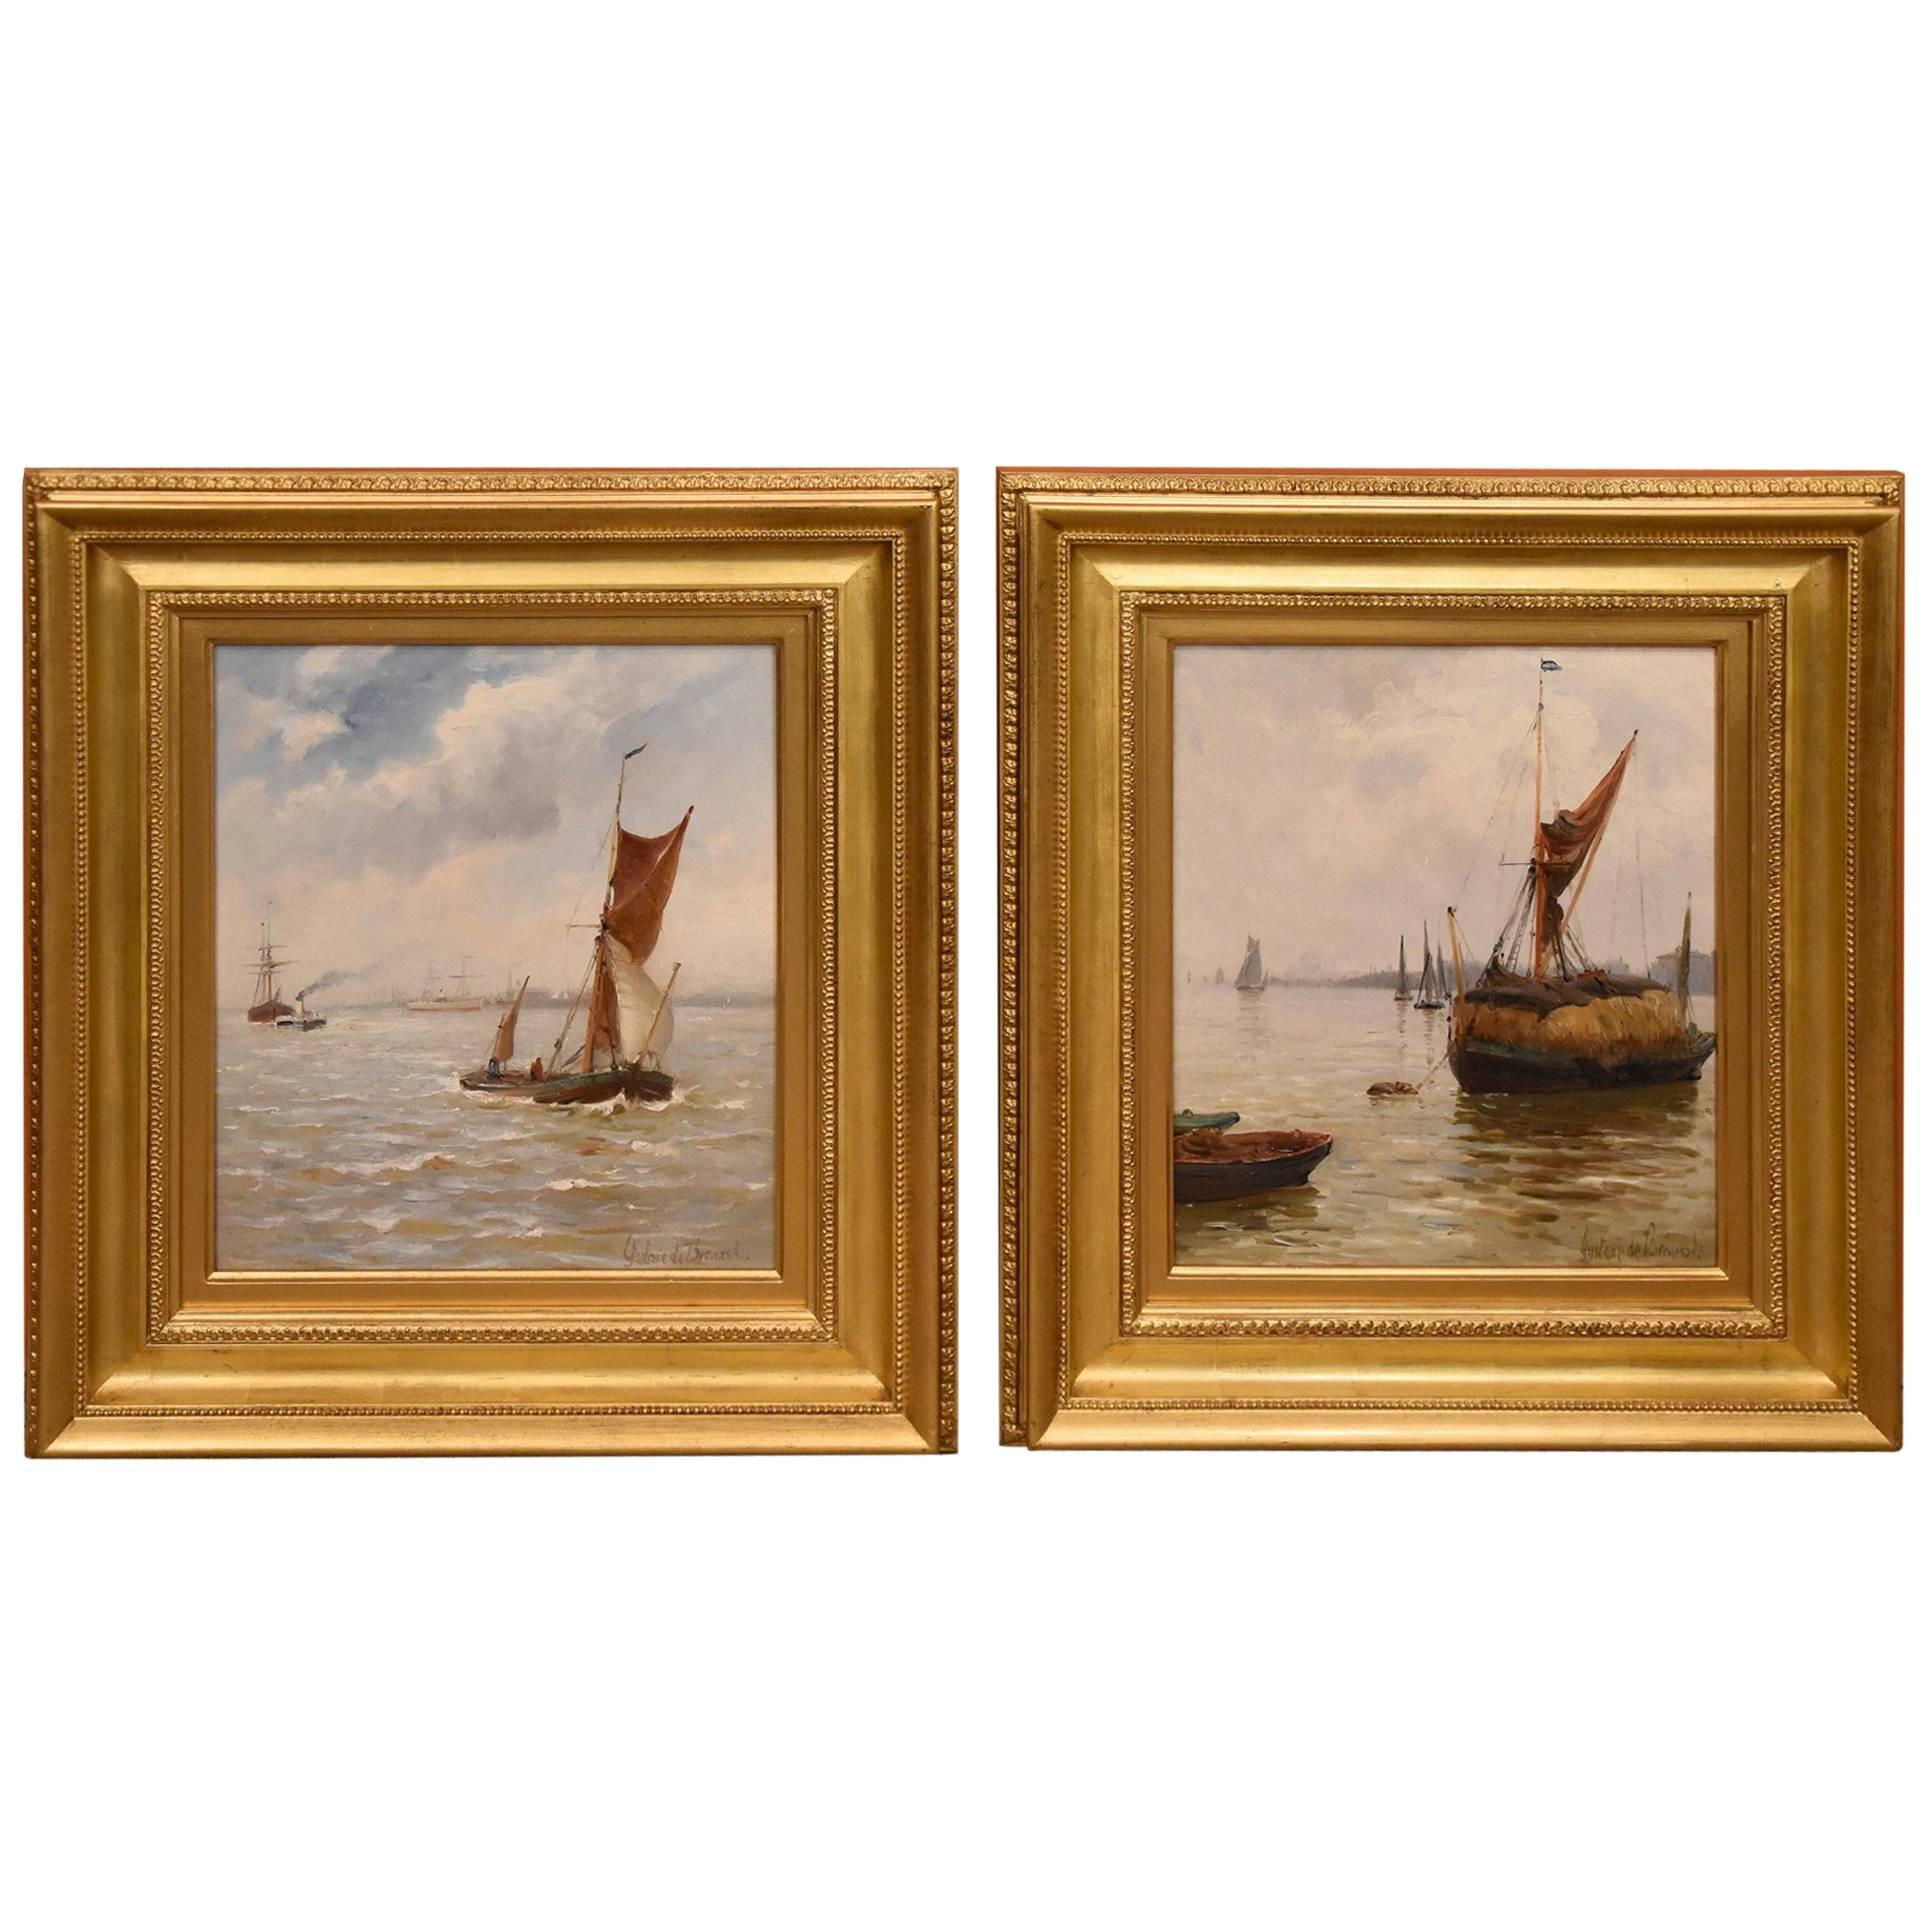 "Off Greenwich" and "On the Thames" Pair by Gustave de Breanski